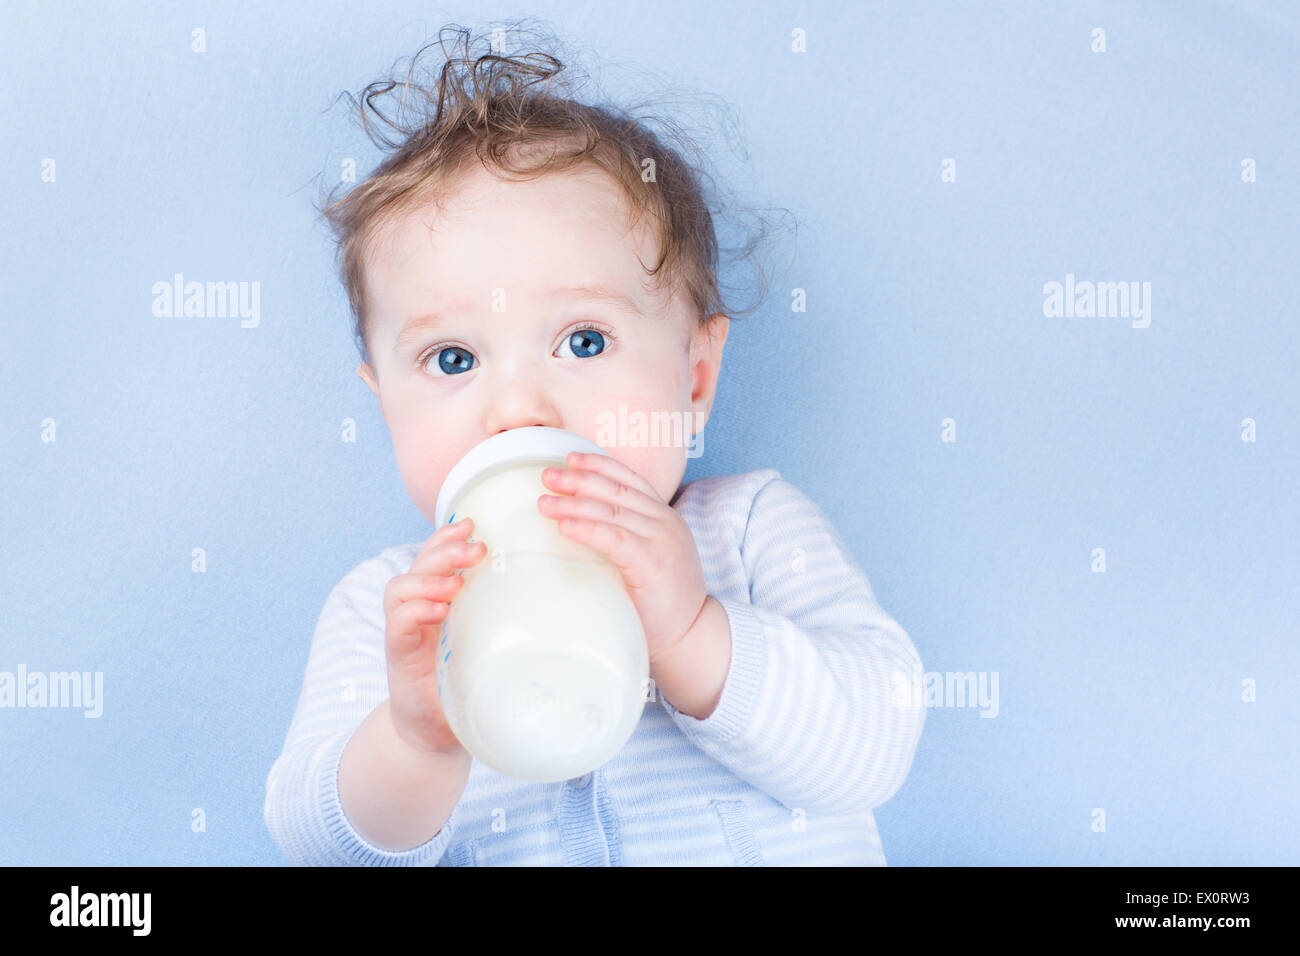 Sweet little baby with beautiful blue eyes drinking milk in a plastic bottle relaxing on a blue knitted blanket Stock Photo